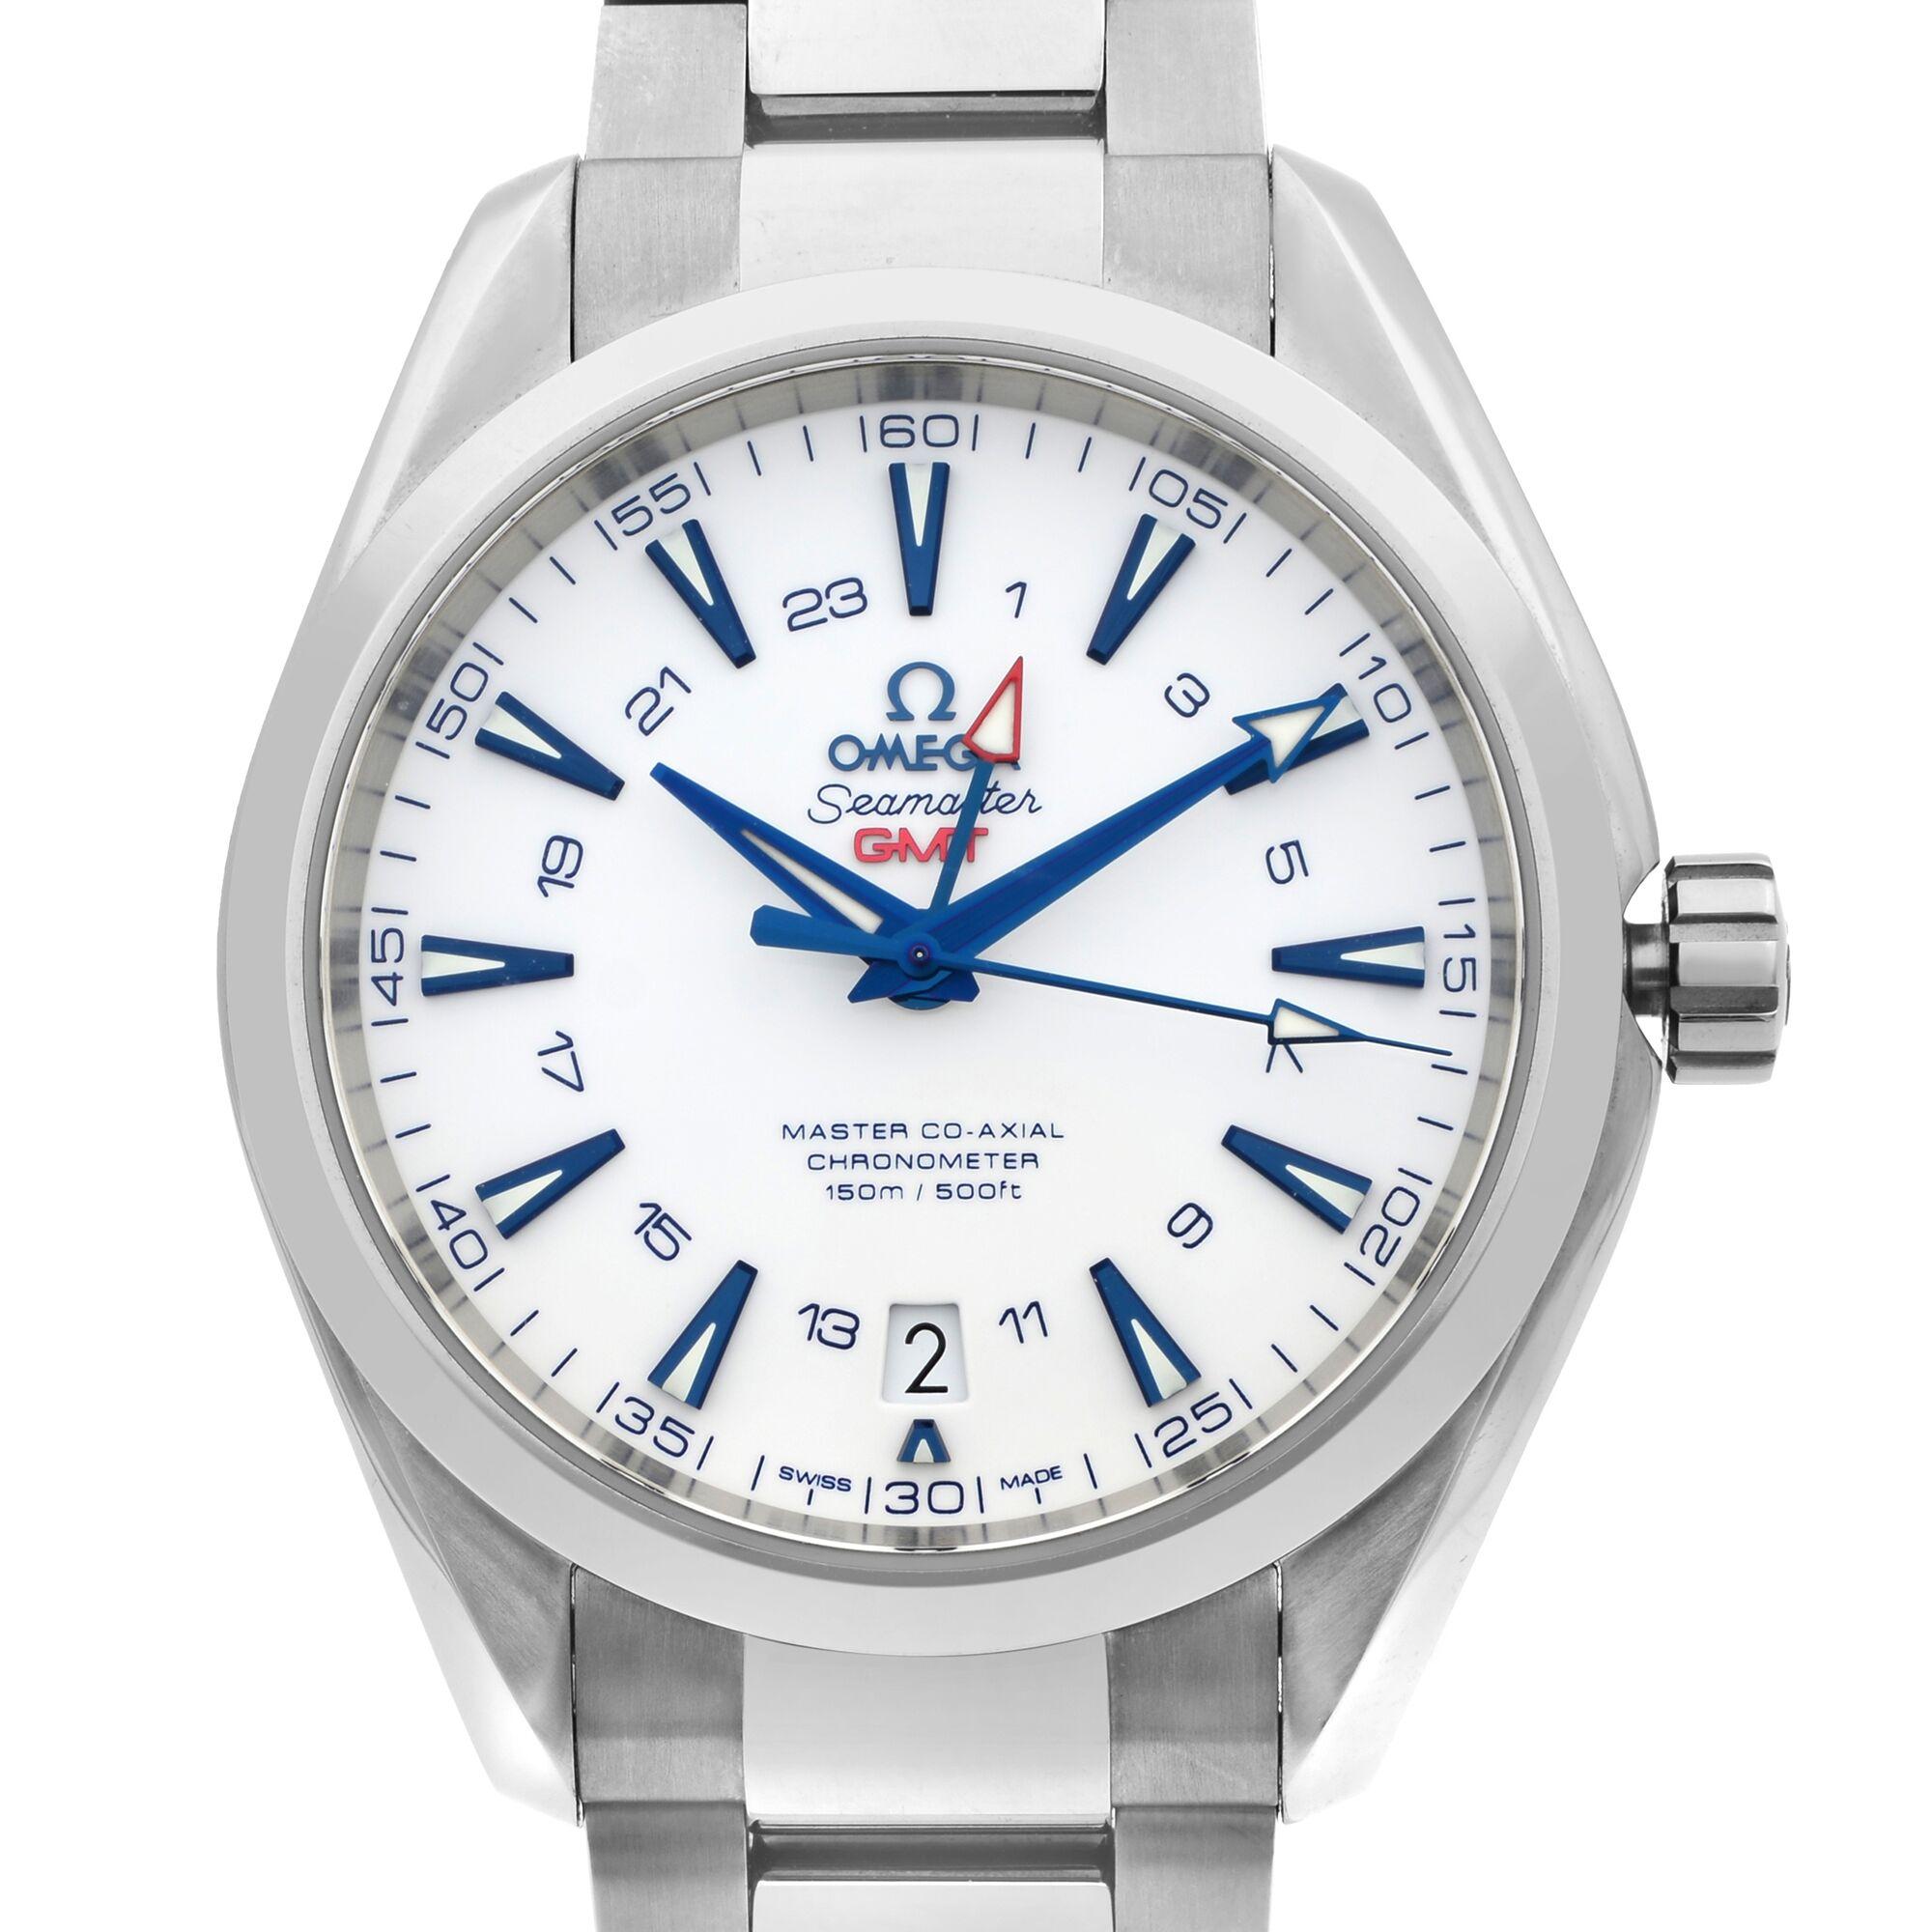 This brand new Omega Seamaster  231.90.43.22.04.001 is a beautiful men's timepiece that is powered by an automatic movement which is cased in a titanium case. It has a round shape face, date dial and has hand sticks style markers. It is completed